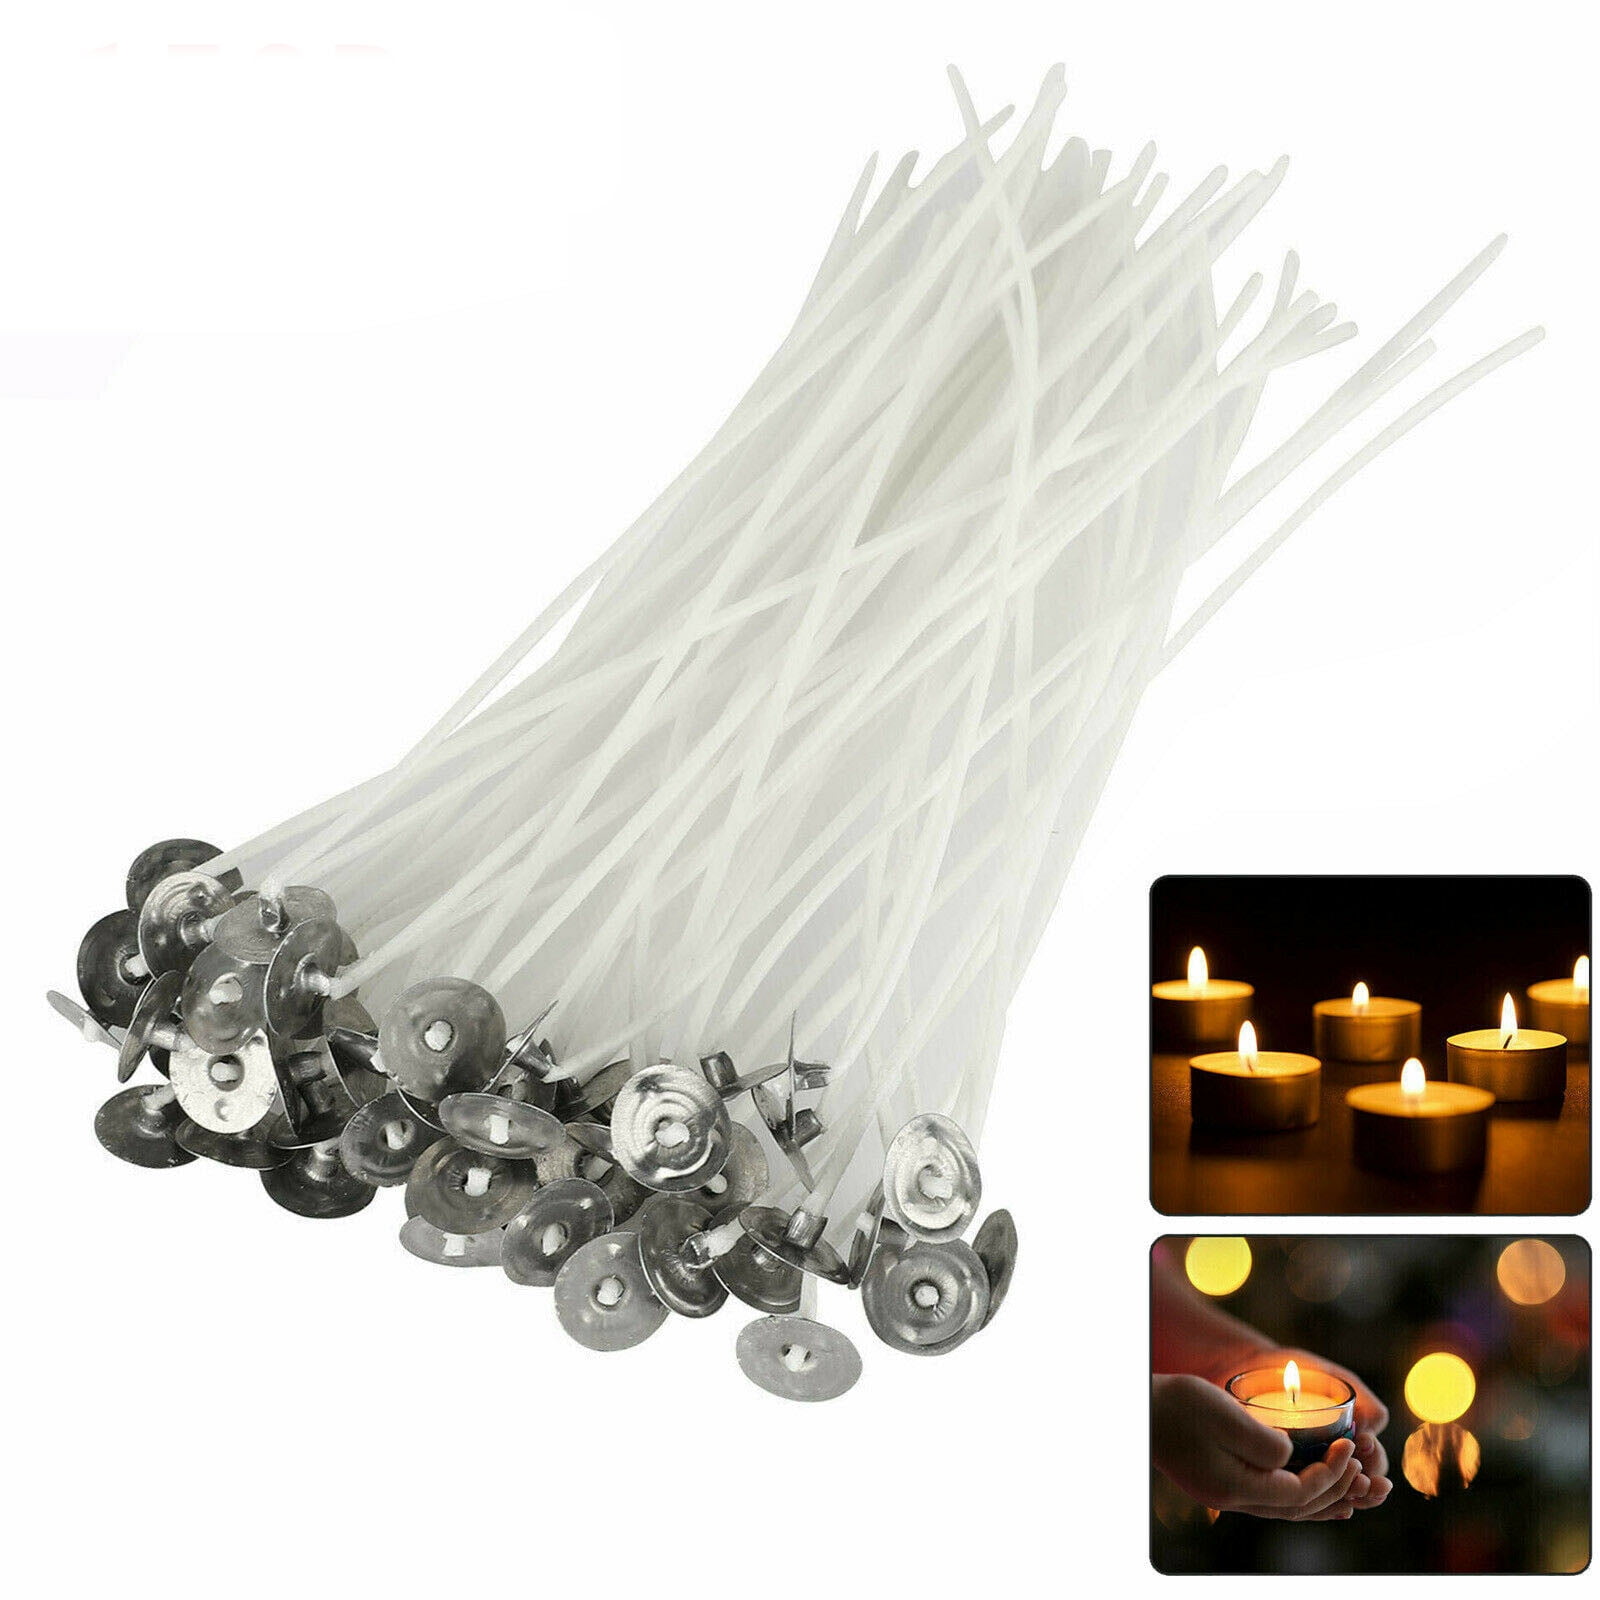 20* Lot High Quality Candle Wicks 8 Inch COTTON Core Candle Making